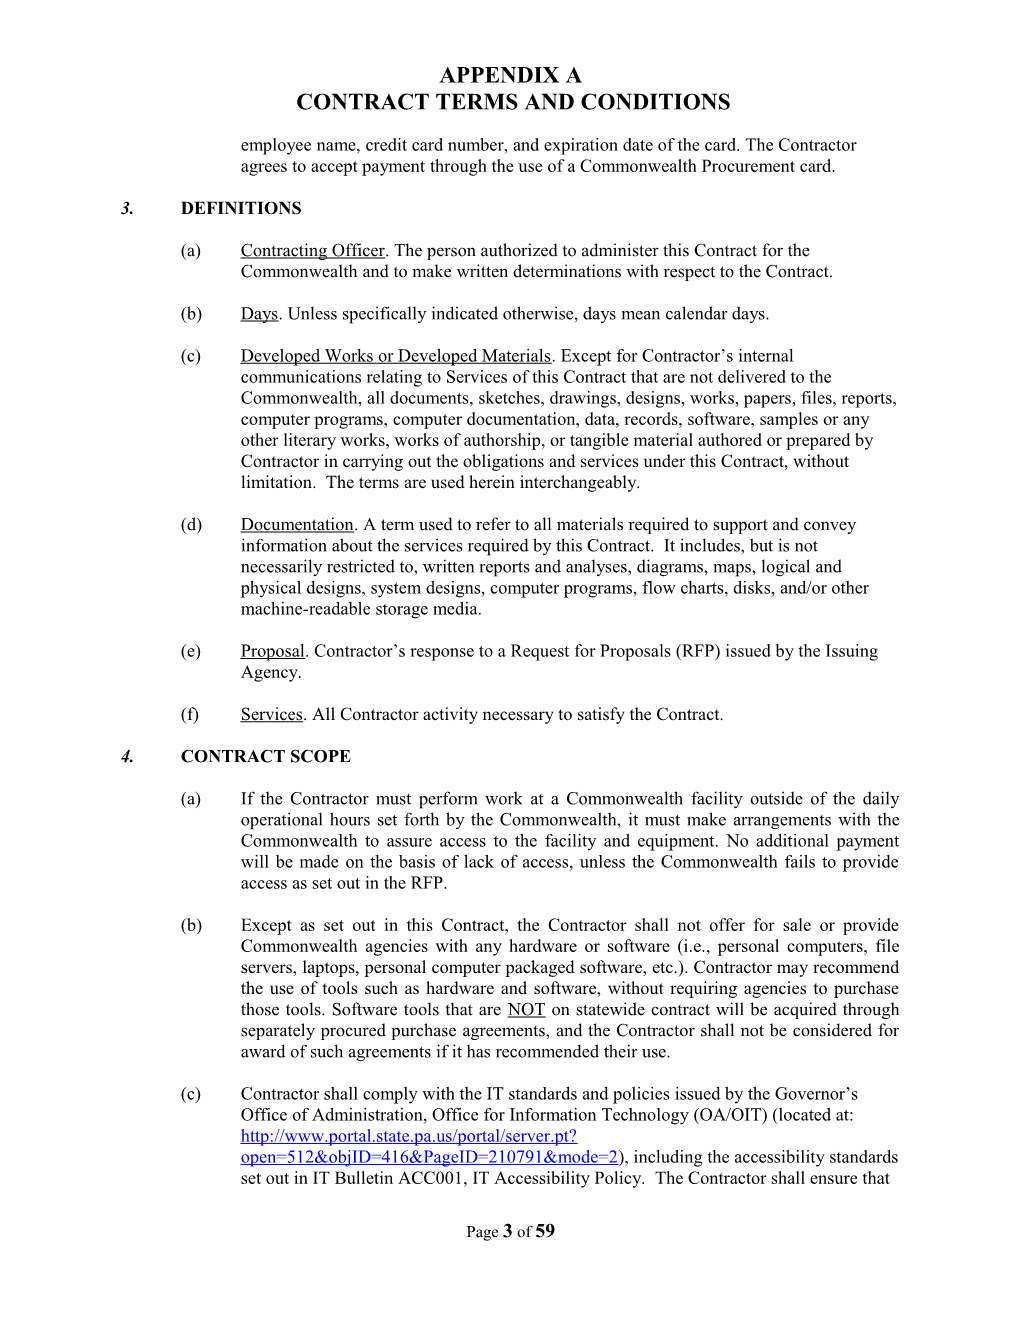 Contract Terms and Conditions s3